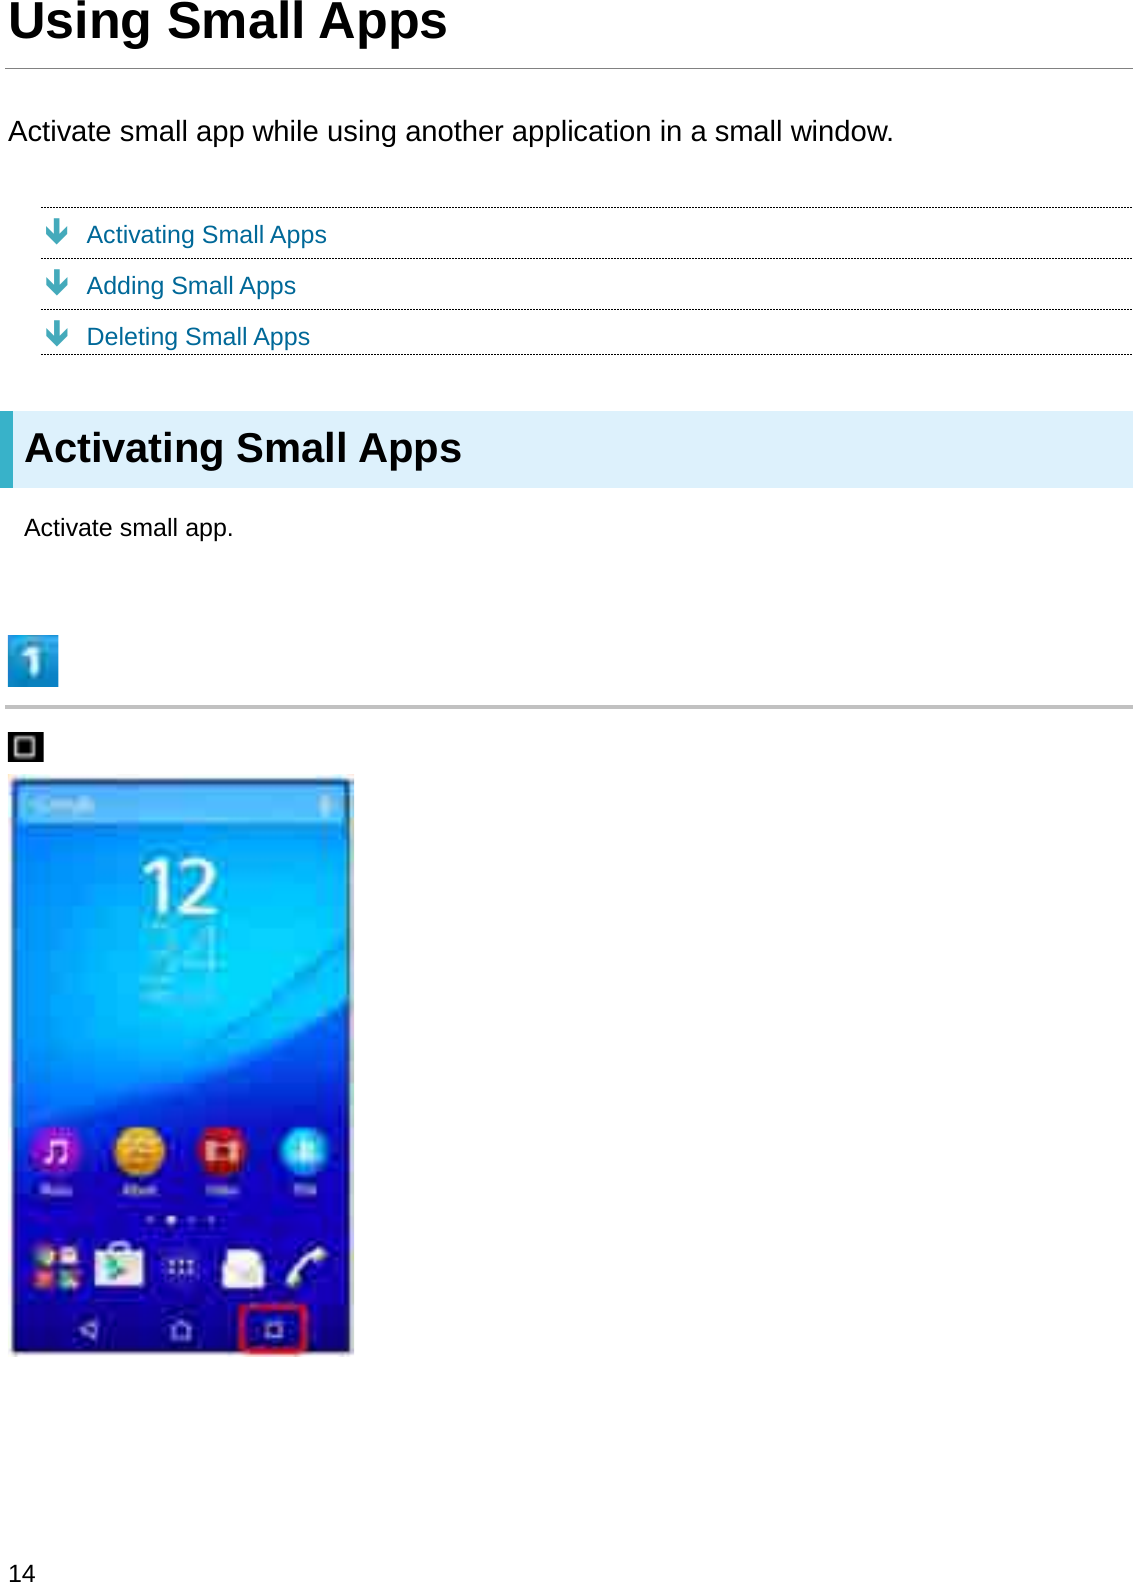 Using Small AppsActivate small app while using another application in a small window.ÐActivating Small AppsÐAdding Small AppsÐDeleting Small AppsActivating Small AppsActivate small app.14